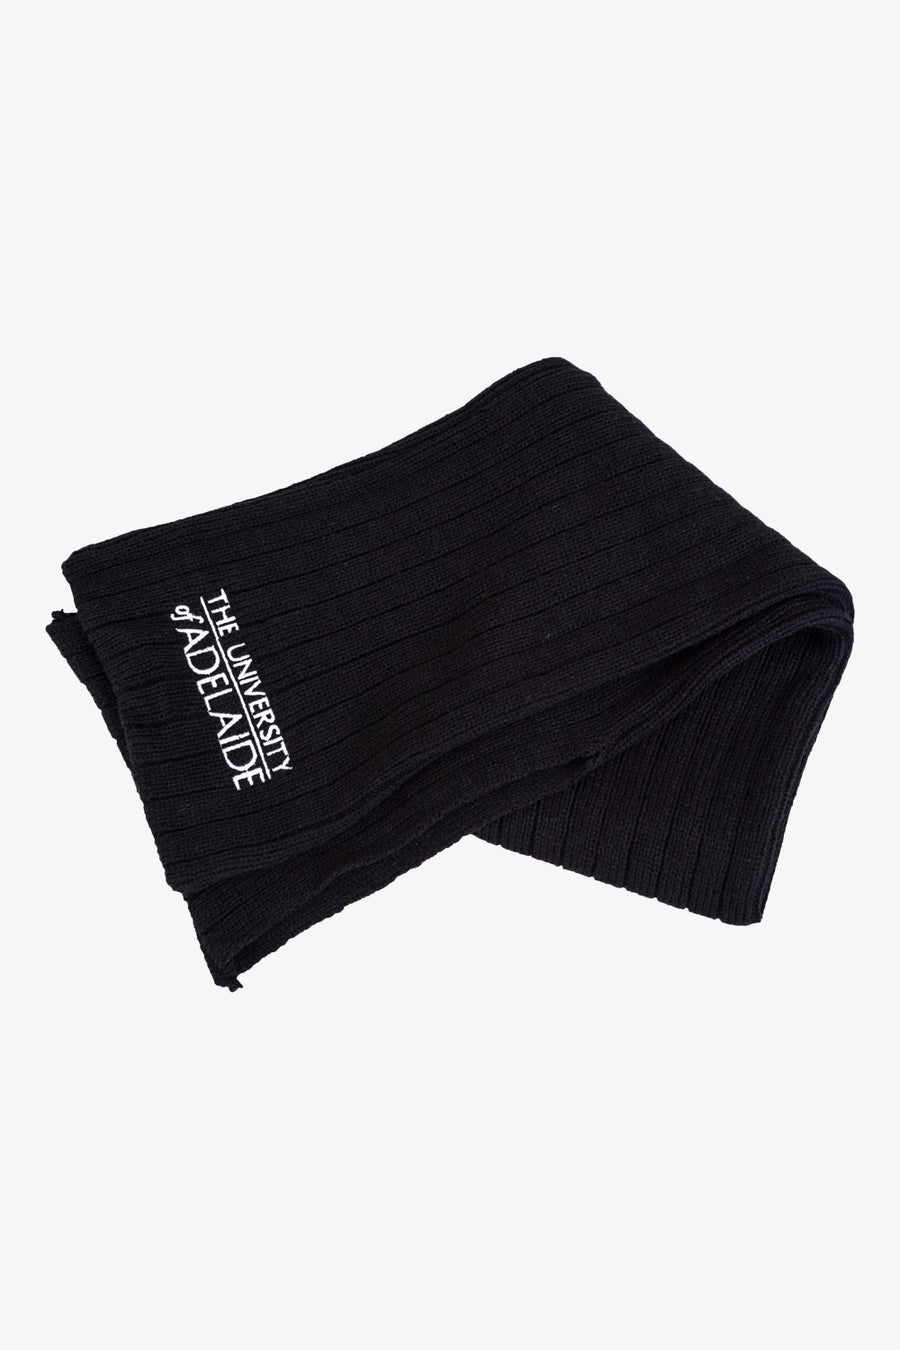 Knit Scarf Navy or Black - The Adelaide Store